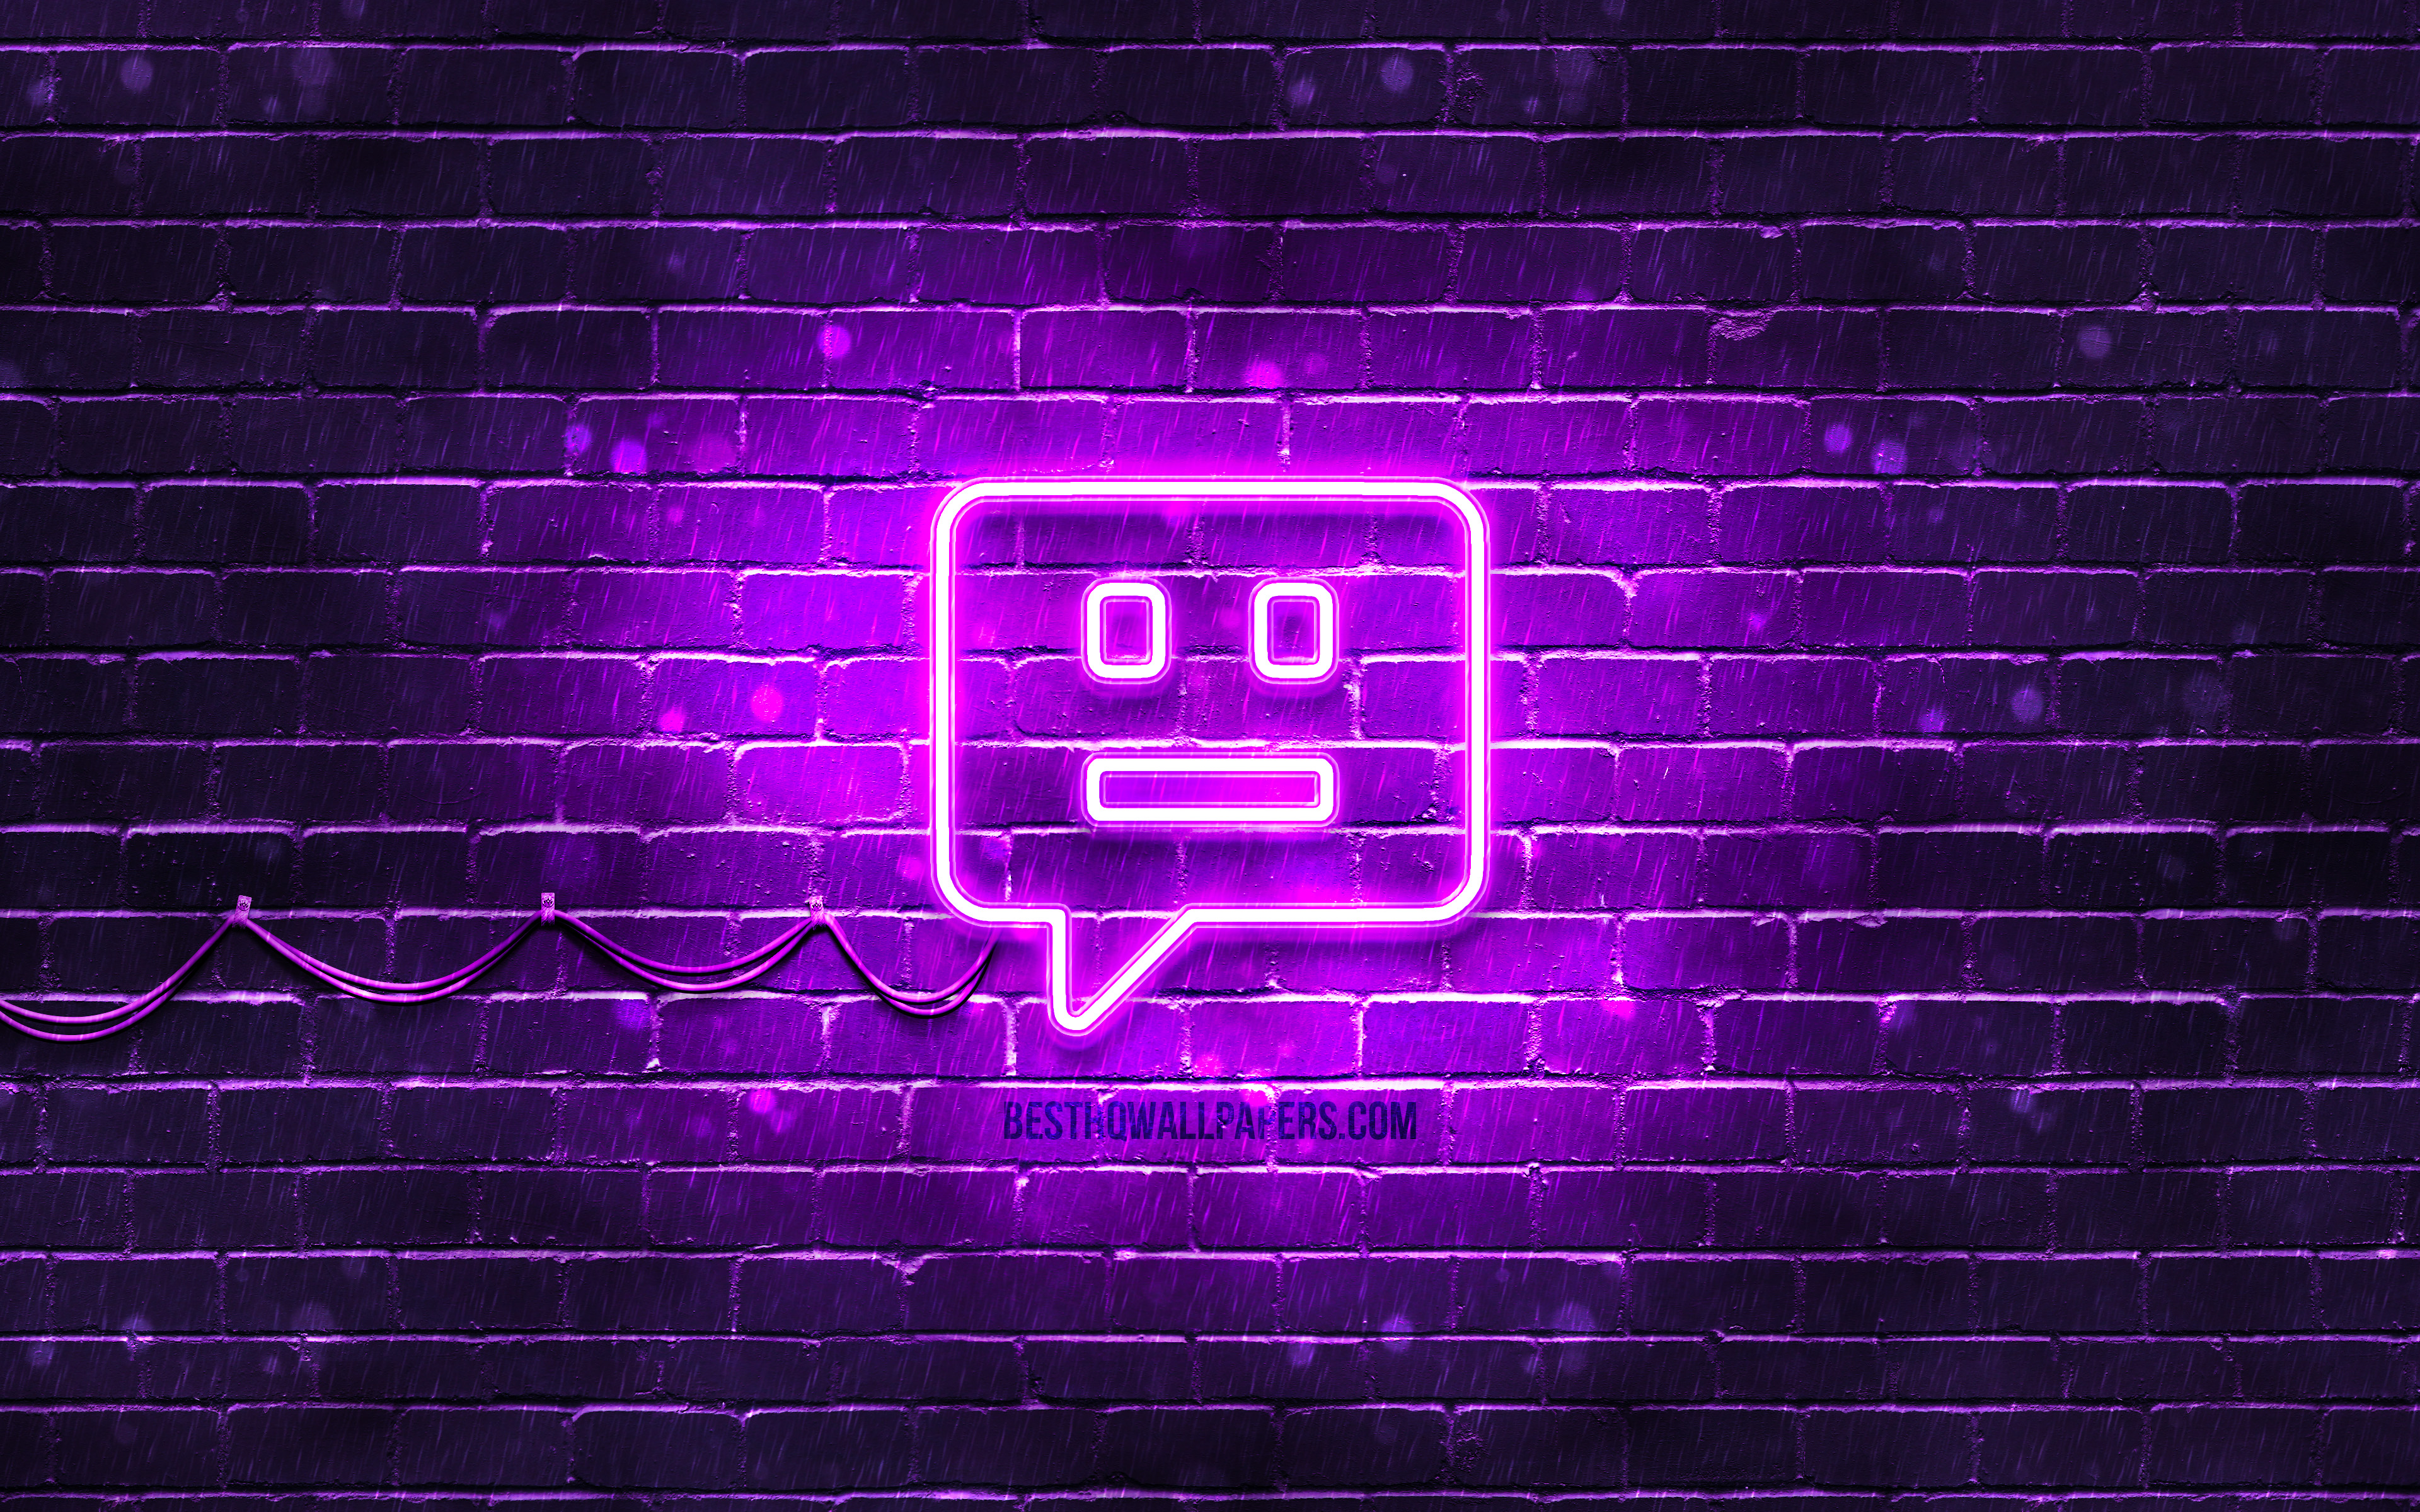 Download wallpaper Chatbot neon icon, 4k, violet background, neon symbols, Chatbot, neon icons, Chatbot sign, computer signs, Chatbot icon, computer icons for desktop with resolution 3840x2400. High Quality HD picture wallpaper